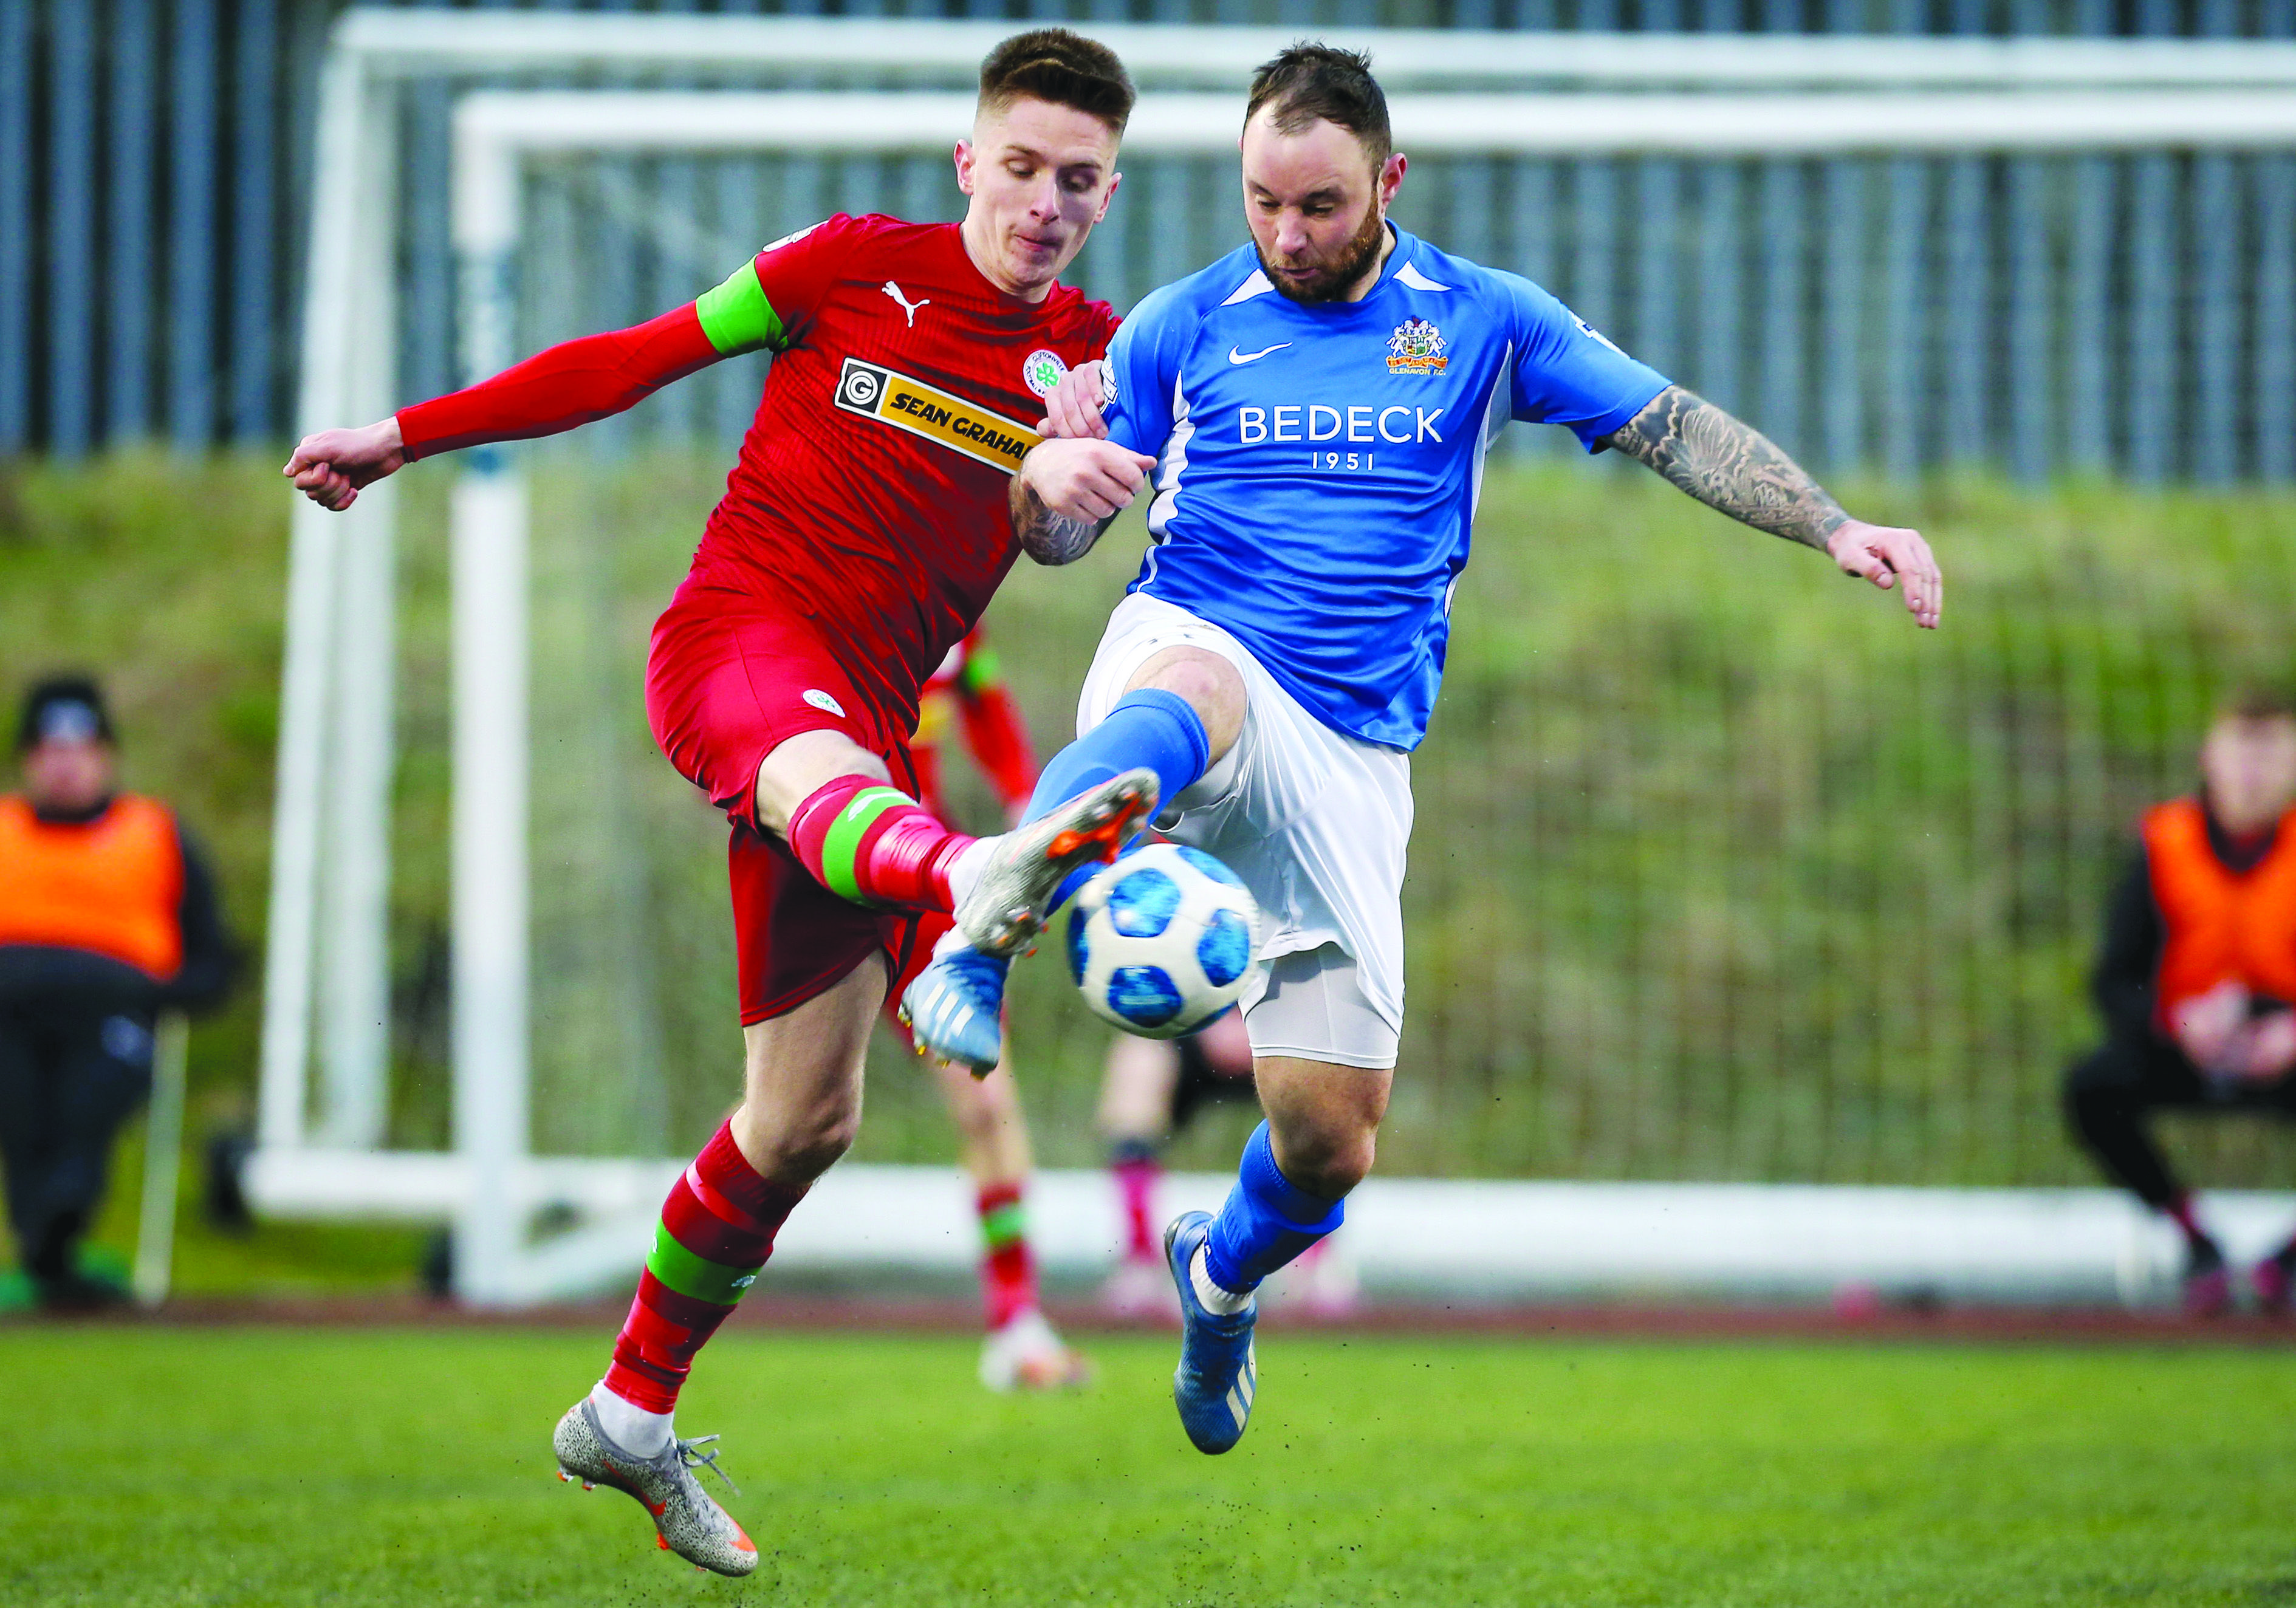 Cilftonville’s Ryan Curran challenges Andrew Doyle of Glenavon last season while the Lurgan Blues are set to host the Reds at Mourneview Park on New Year’s Day